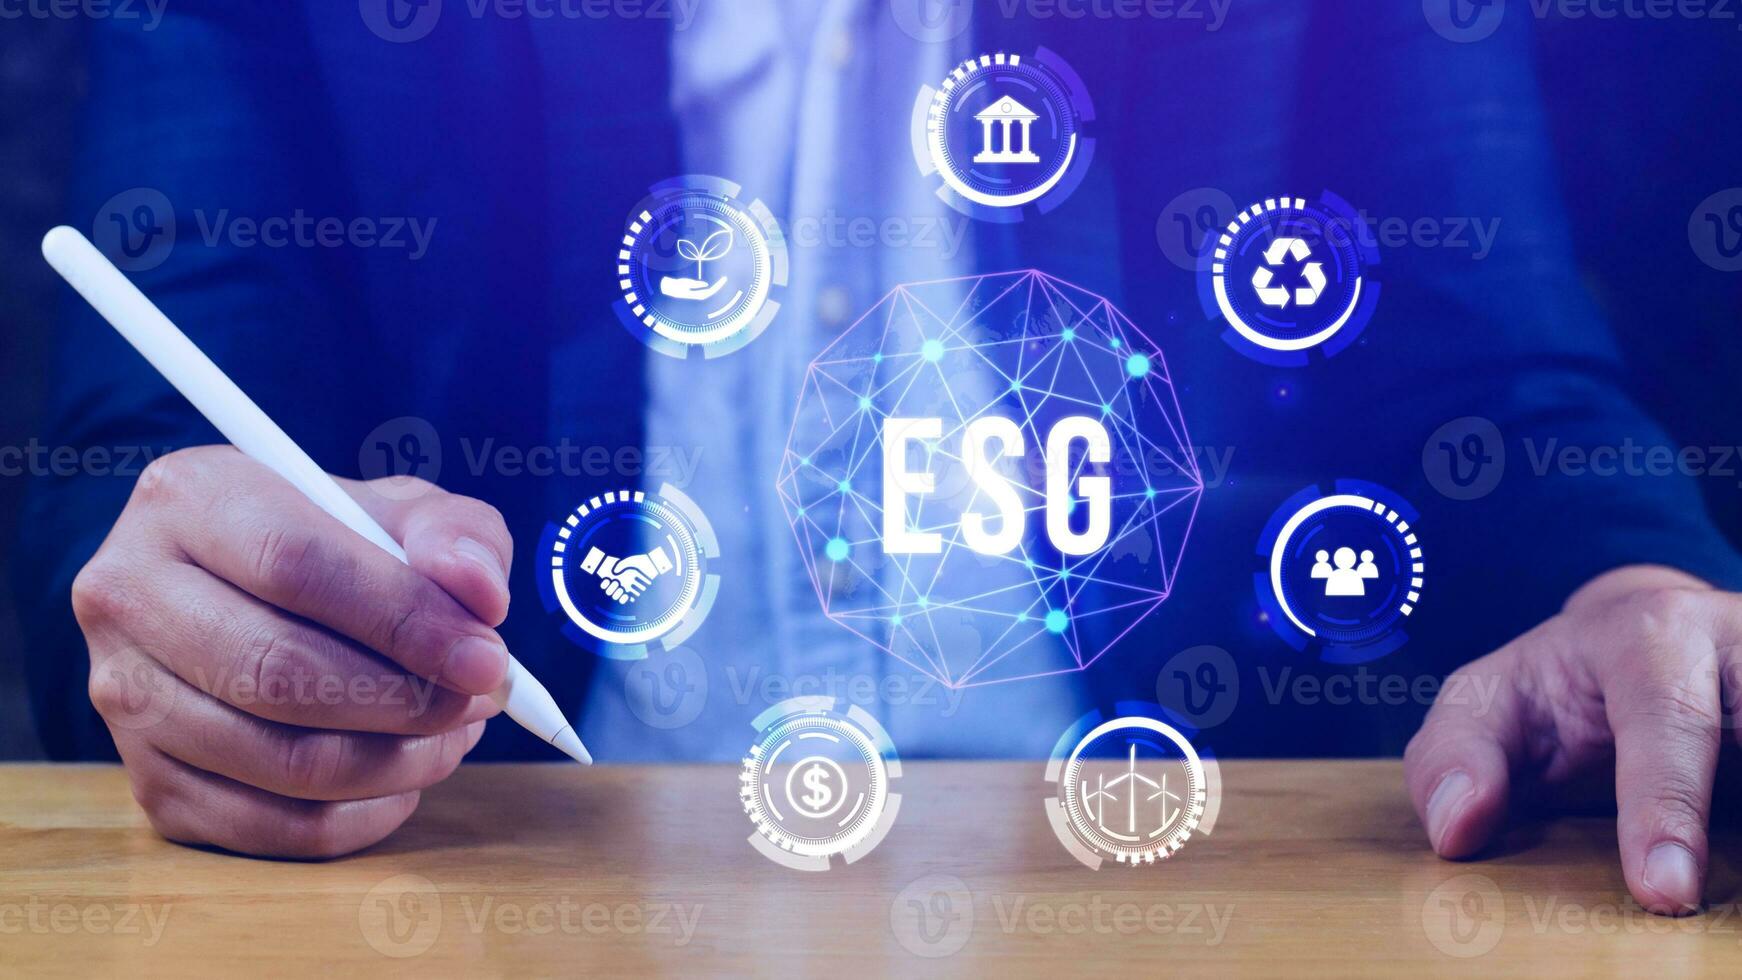 ESG icon concept in the hand for environmental, social and governance in sustainable and ethical business on the Network connection, businessman pressing button on screen. photo